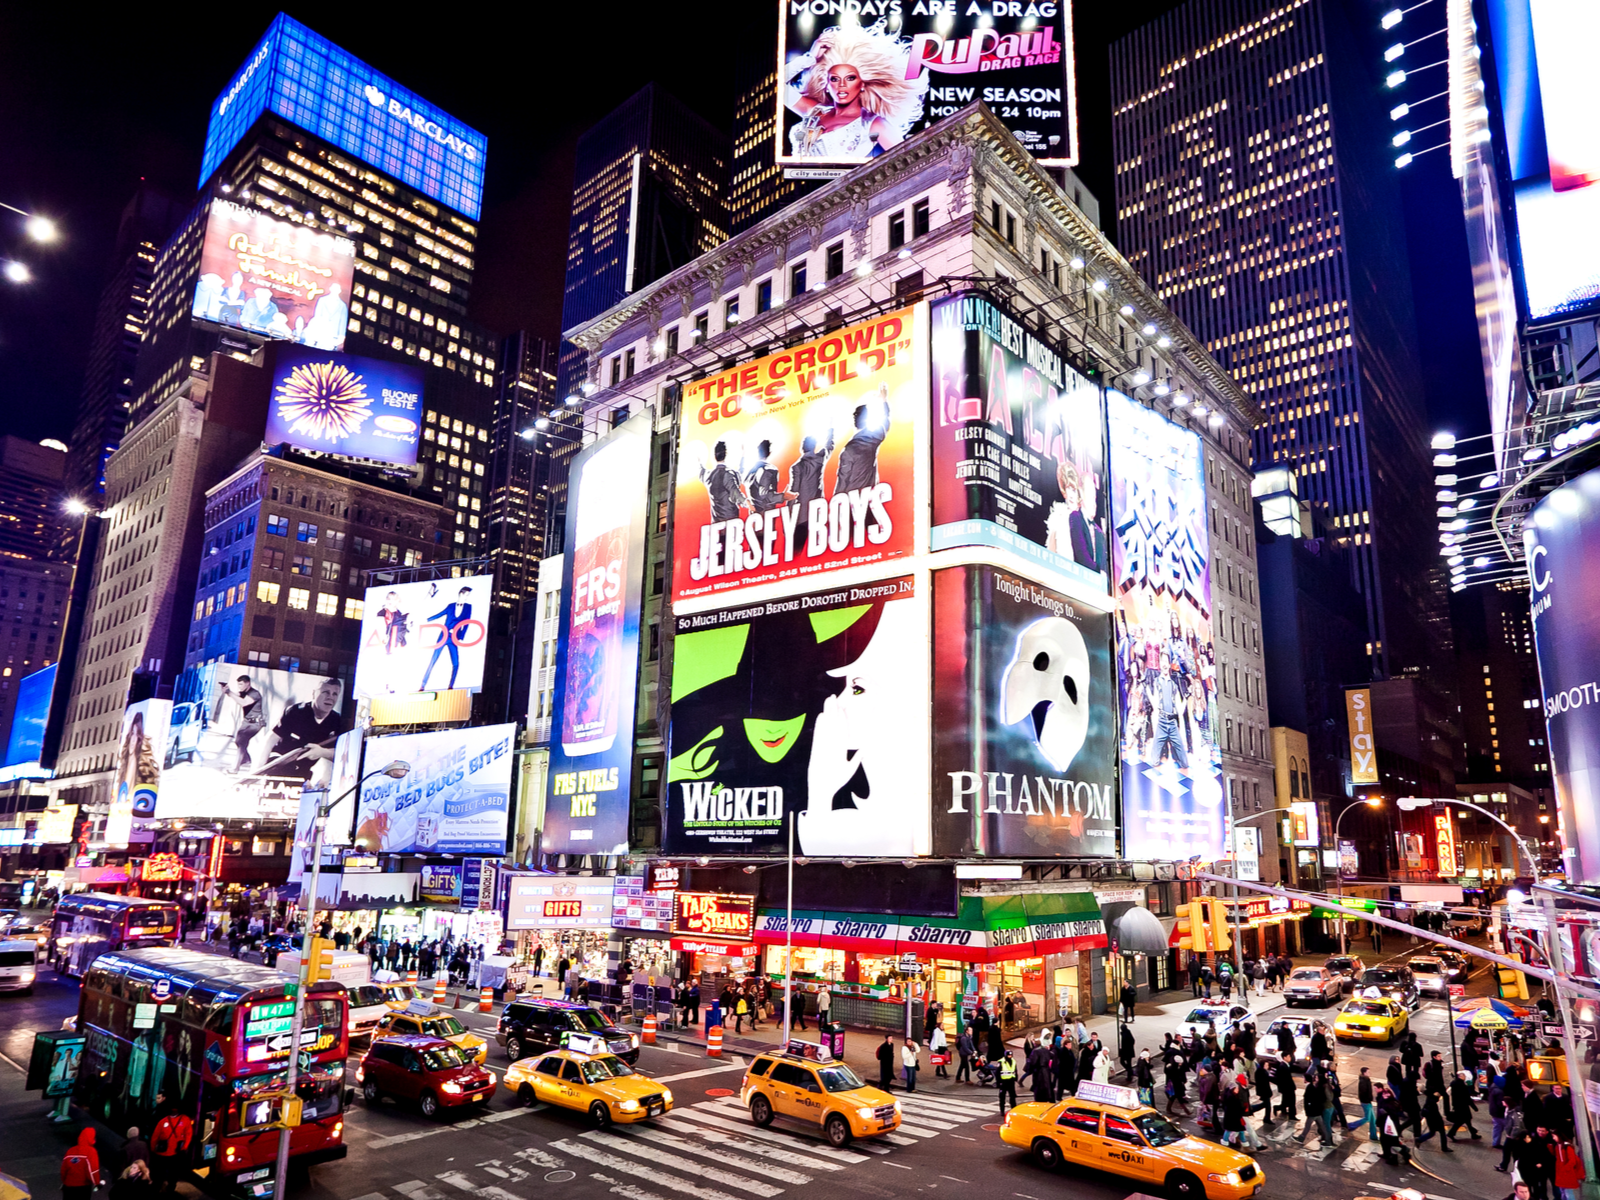 The busy and the bright Time Square in New York at night, considered as one of the most iconic places in America, with Illuminated facades of Broadway theaters